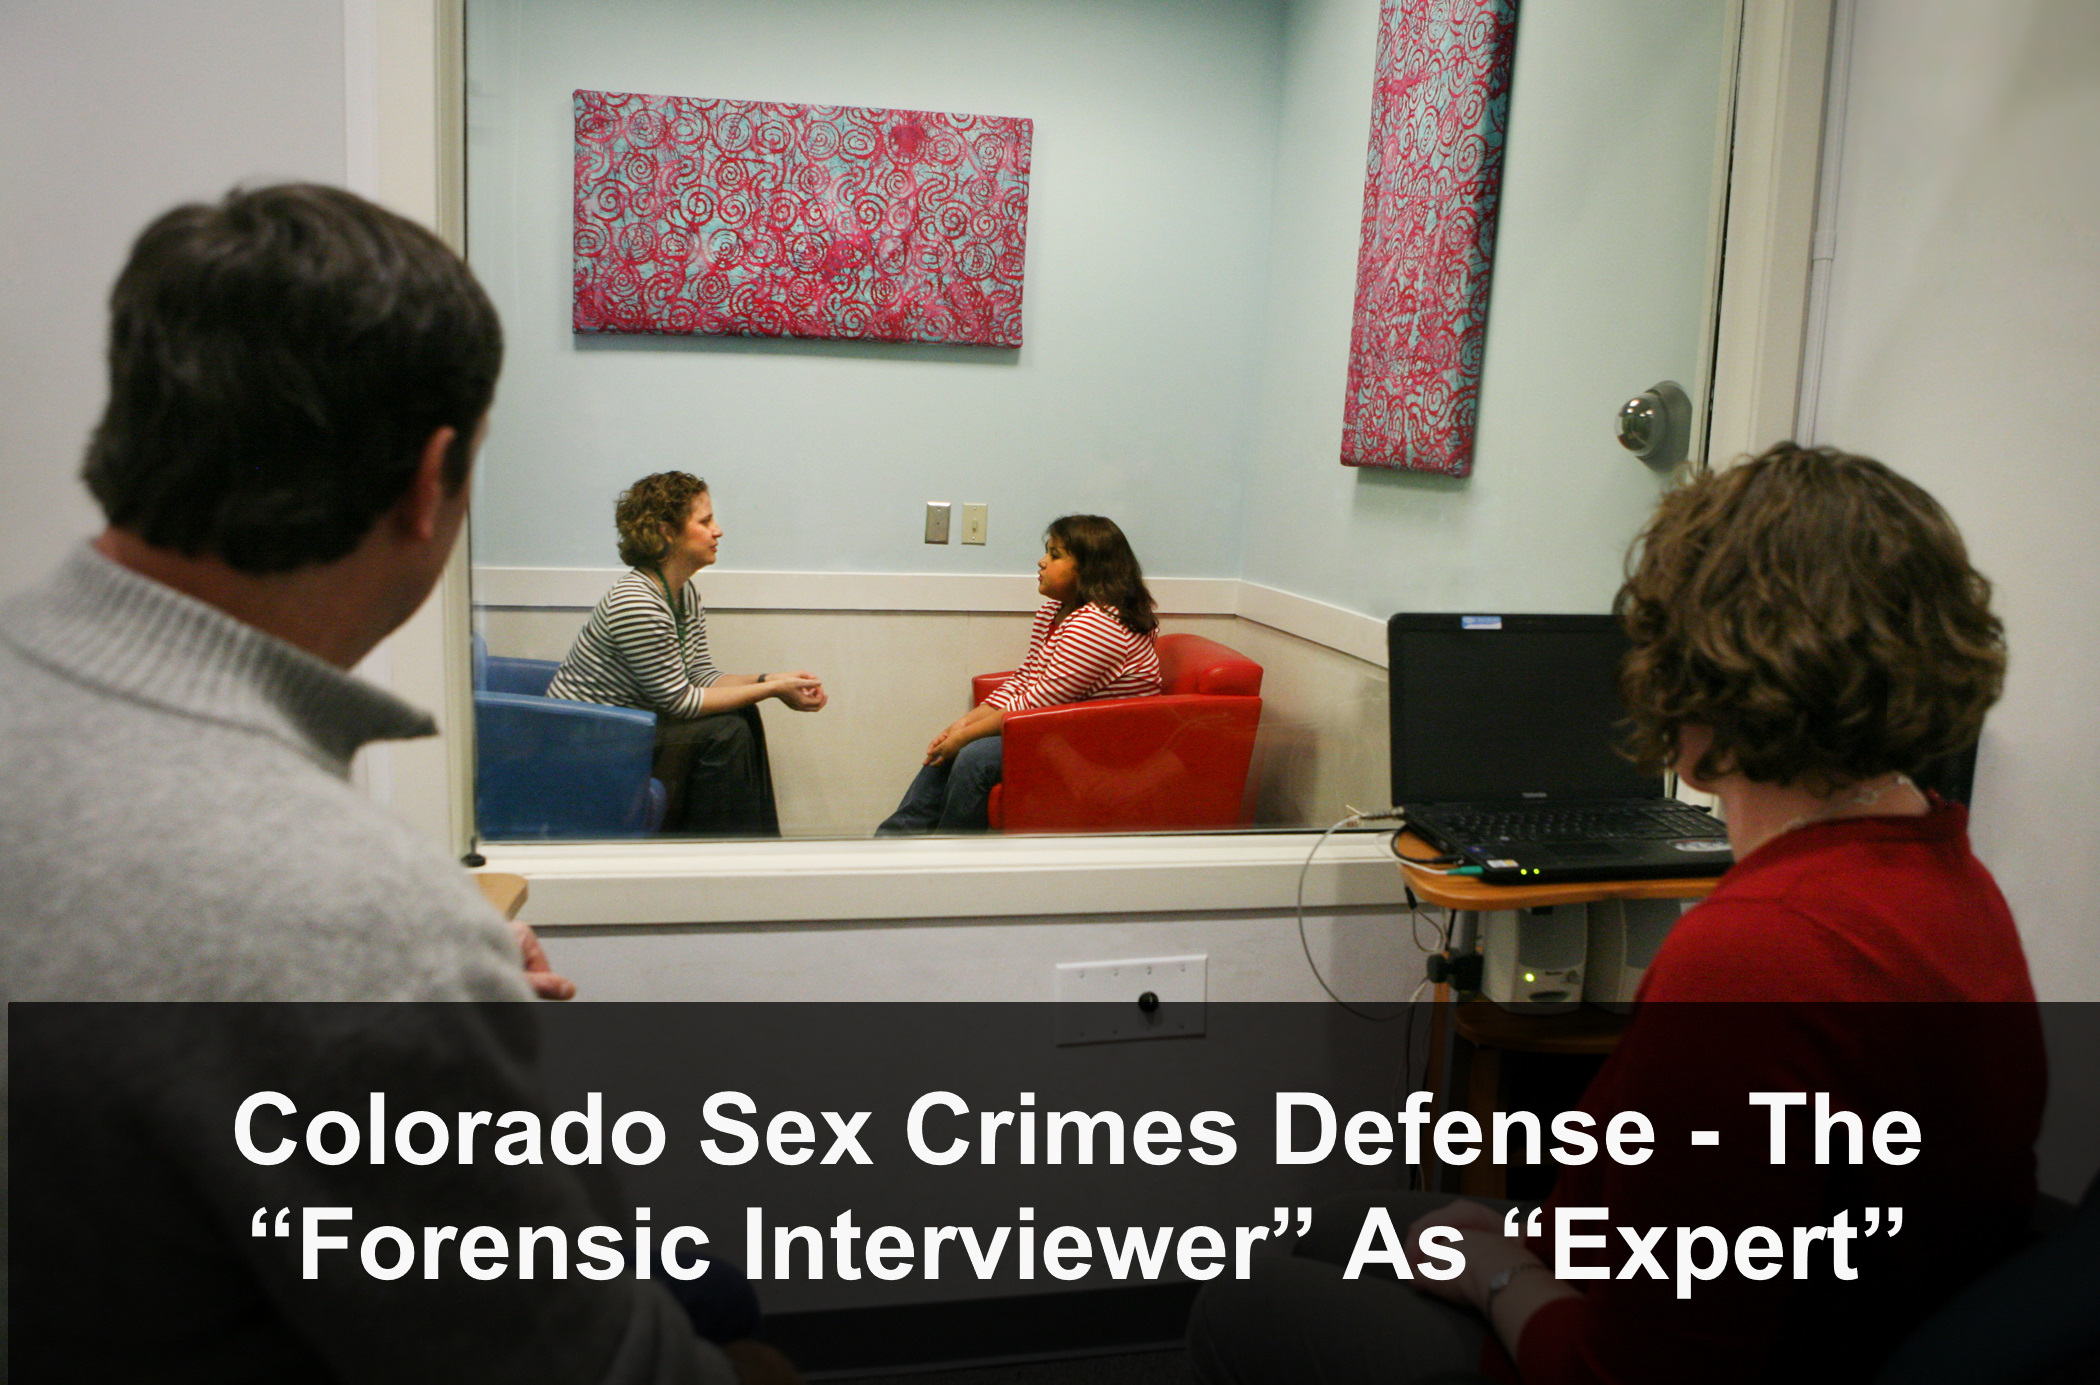 Colorado Sex Crimes Defense - The "Forensic Interviewer" As "Expert"